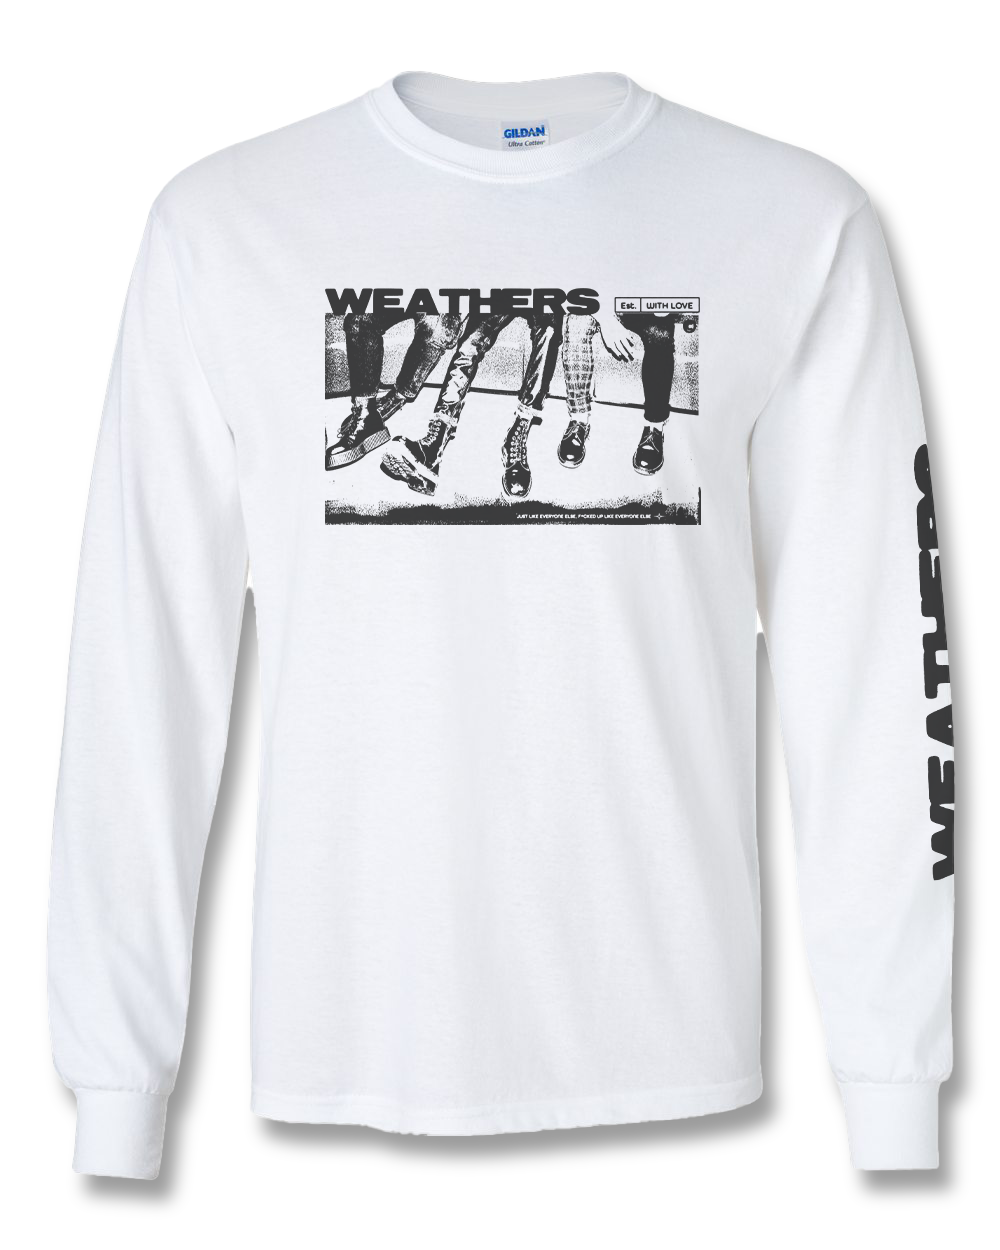 Est. With Love Long Sleeve Tee in White